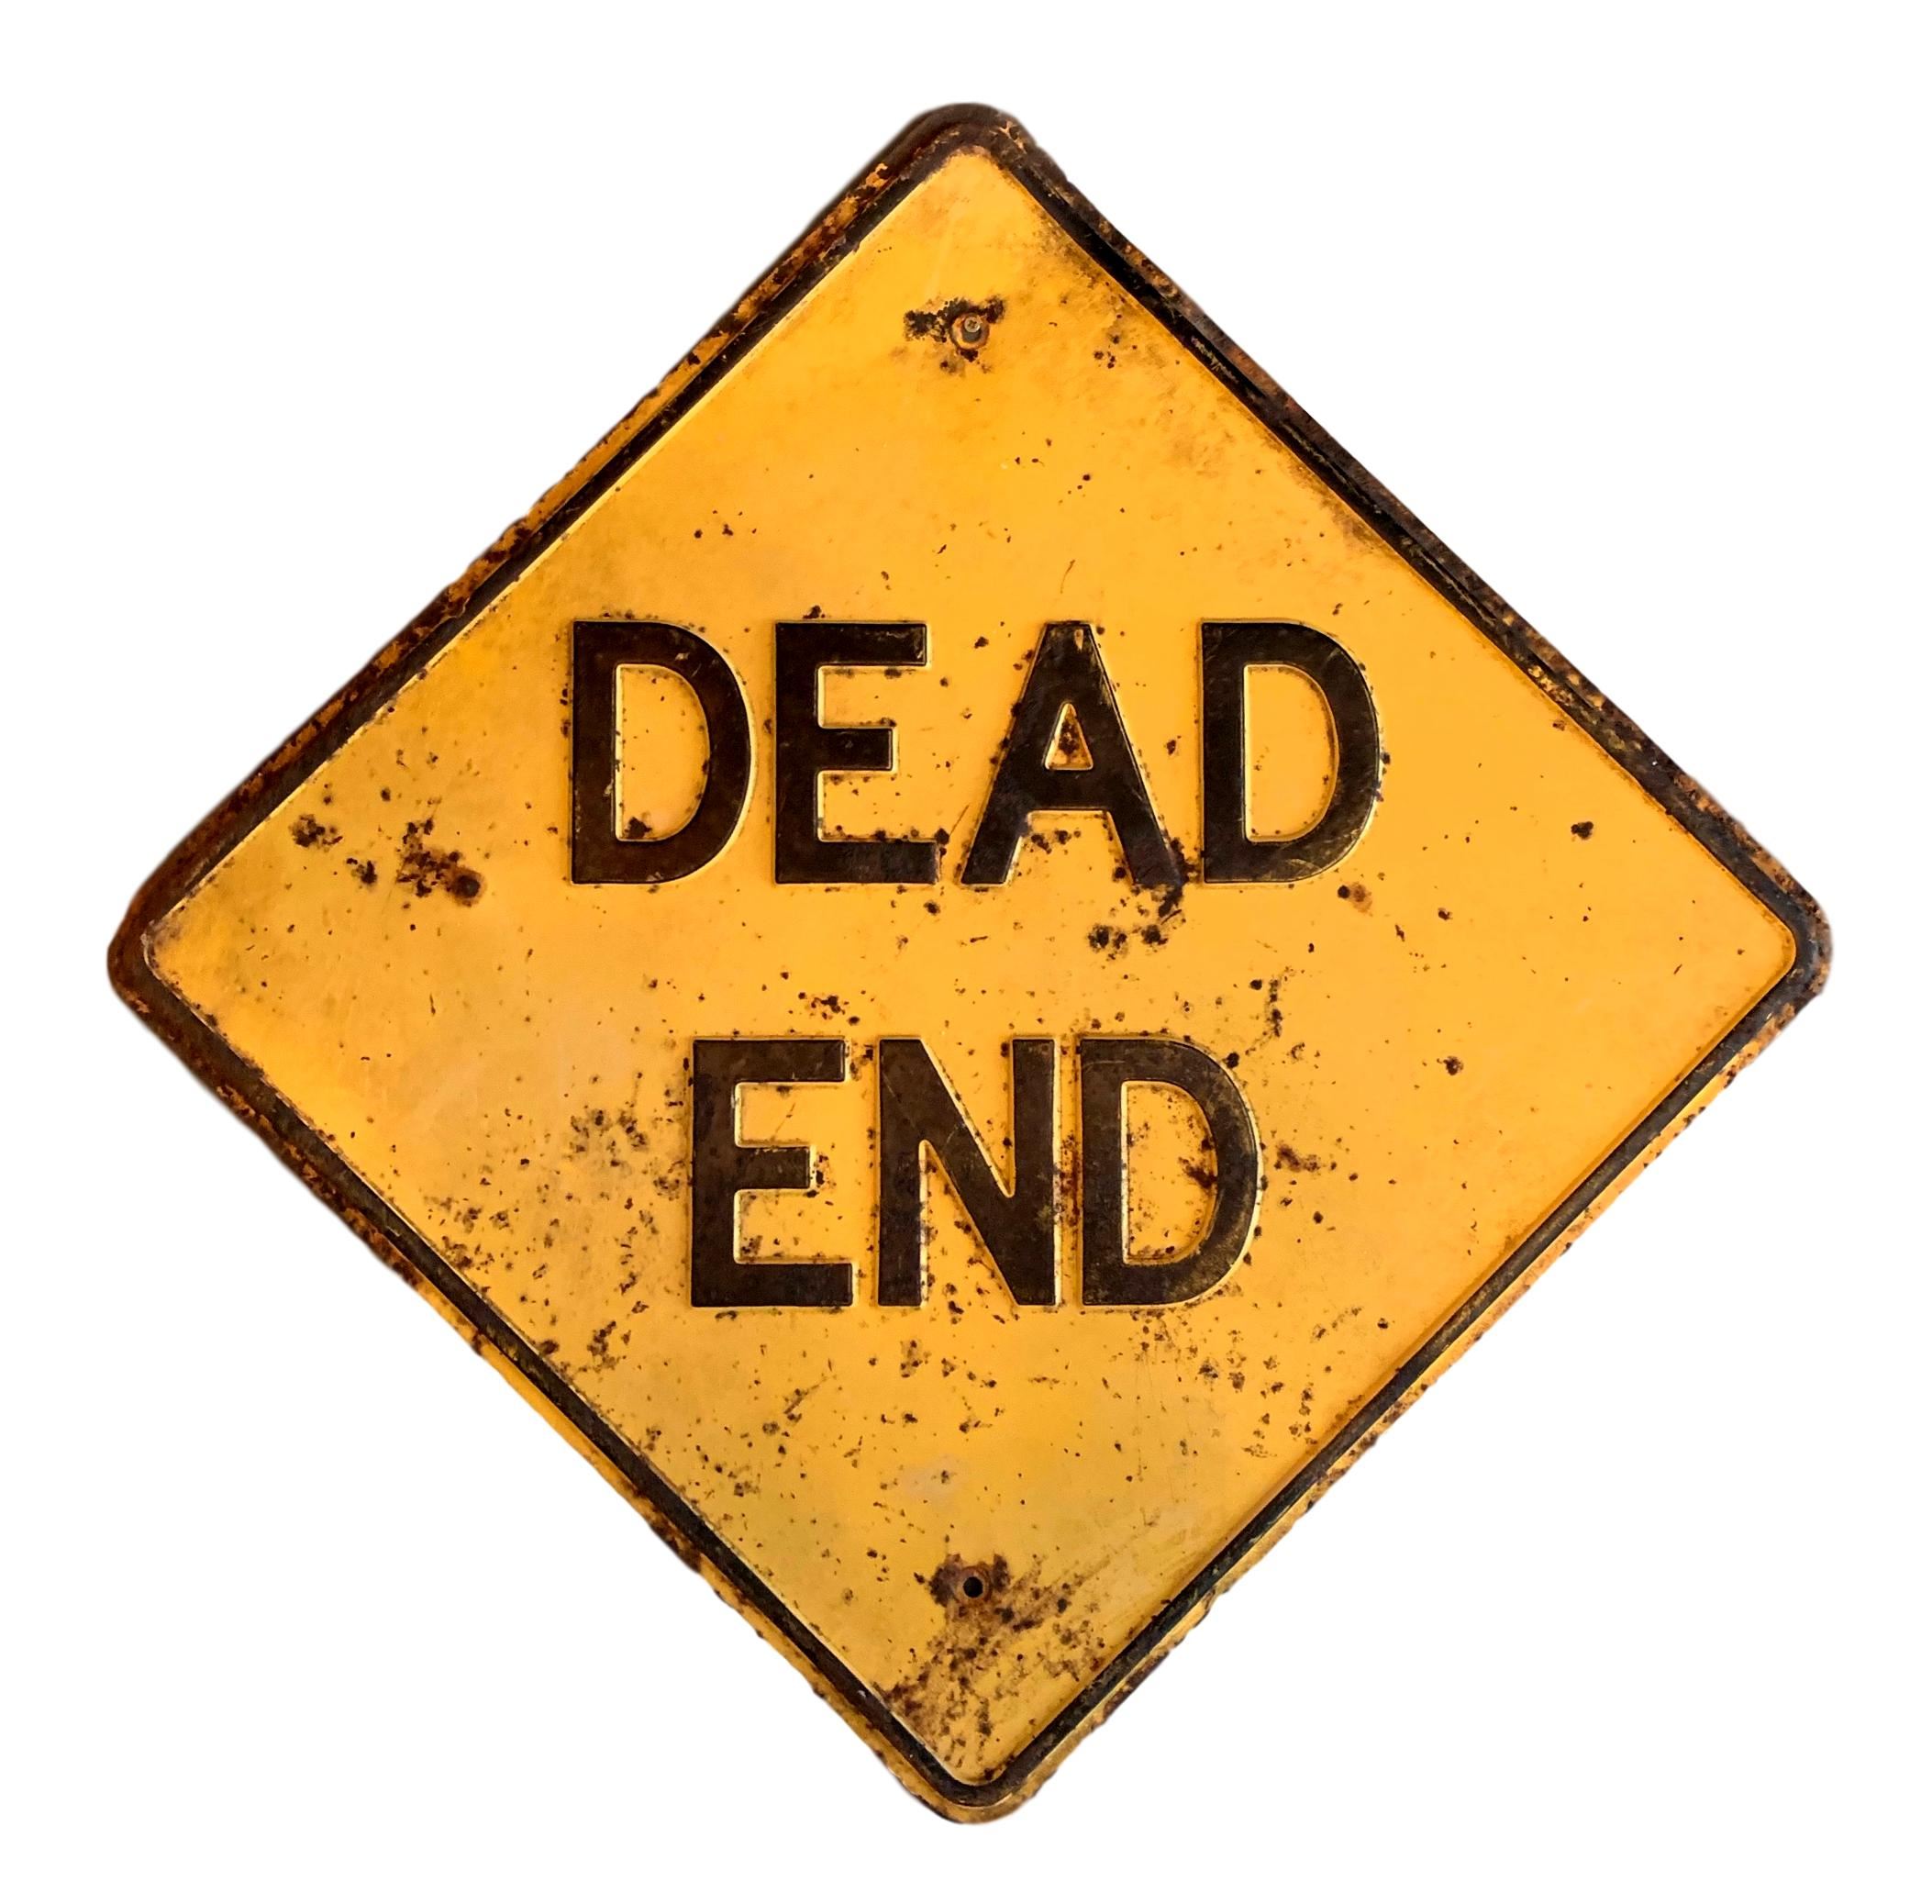 Dead End Sign · Free Stock Photo